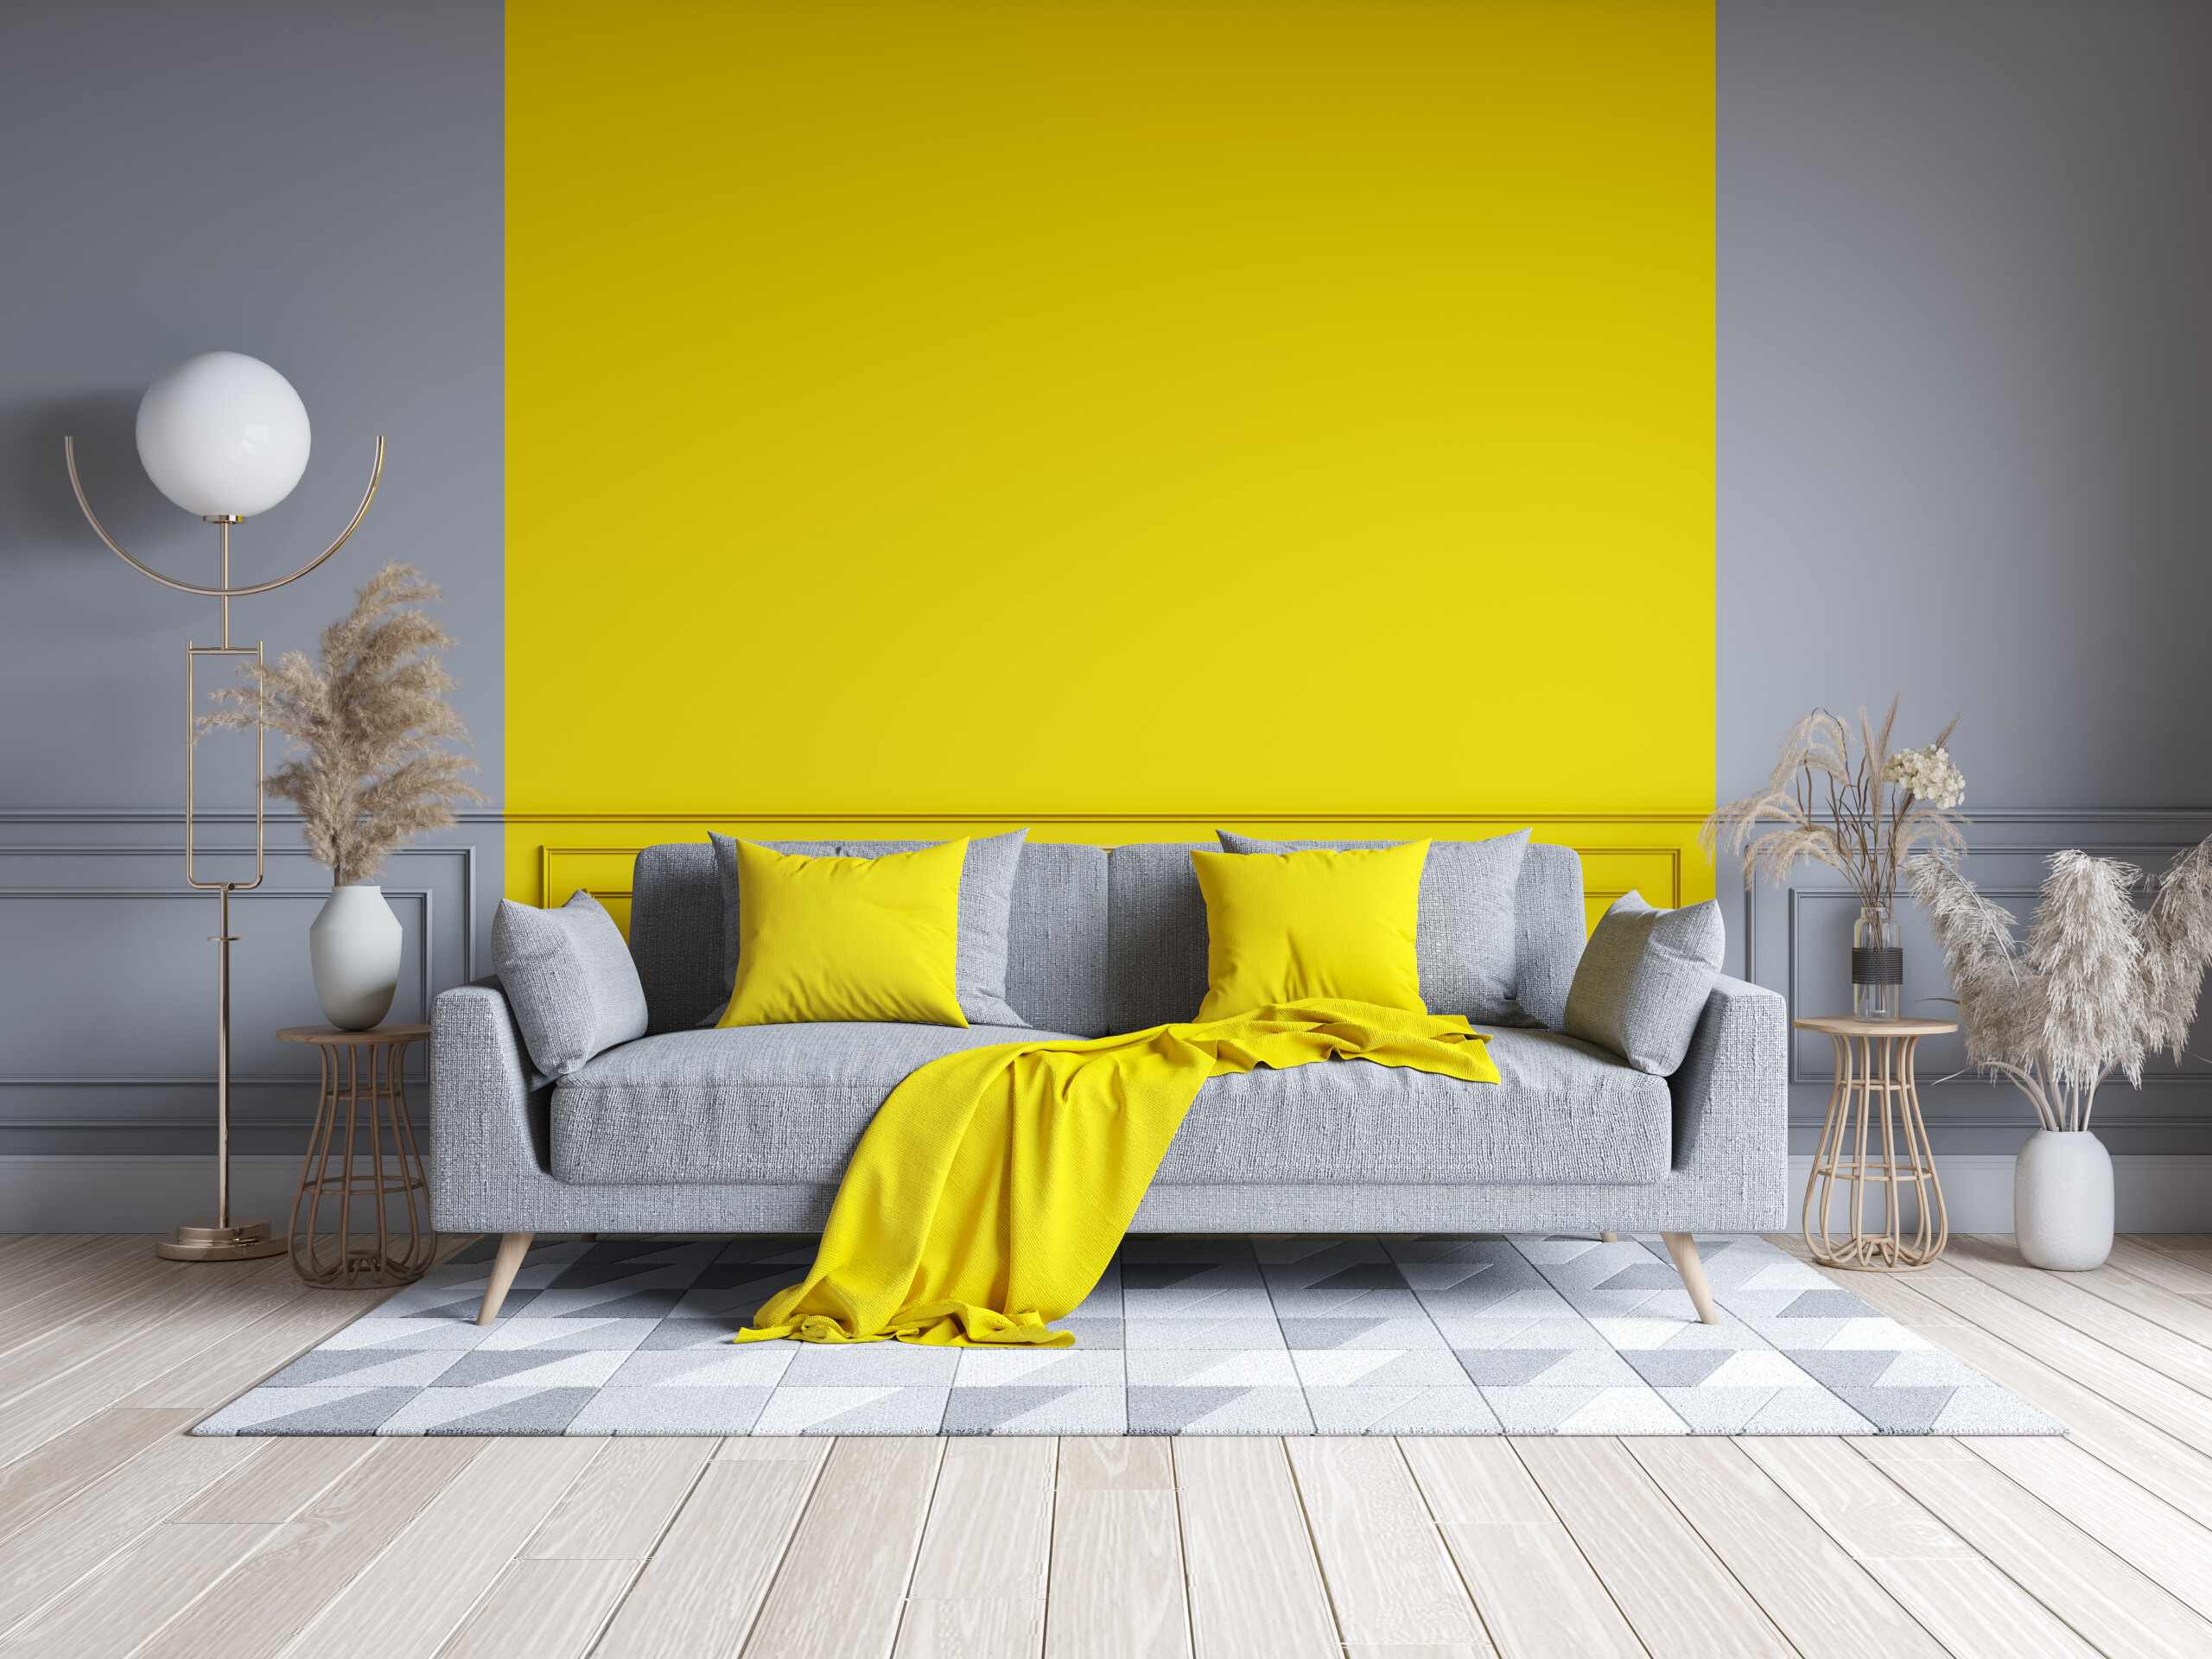 9 Amazing Living Room Paint Ideas For An Affordable Makeover - Décor Aid